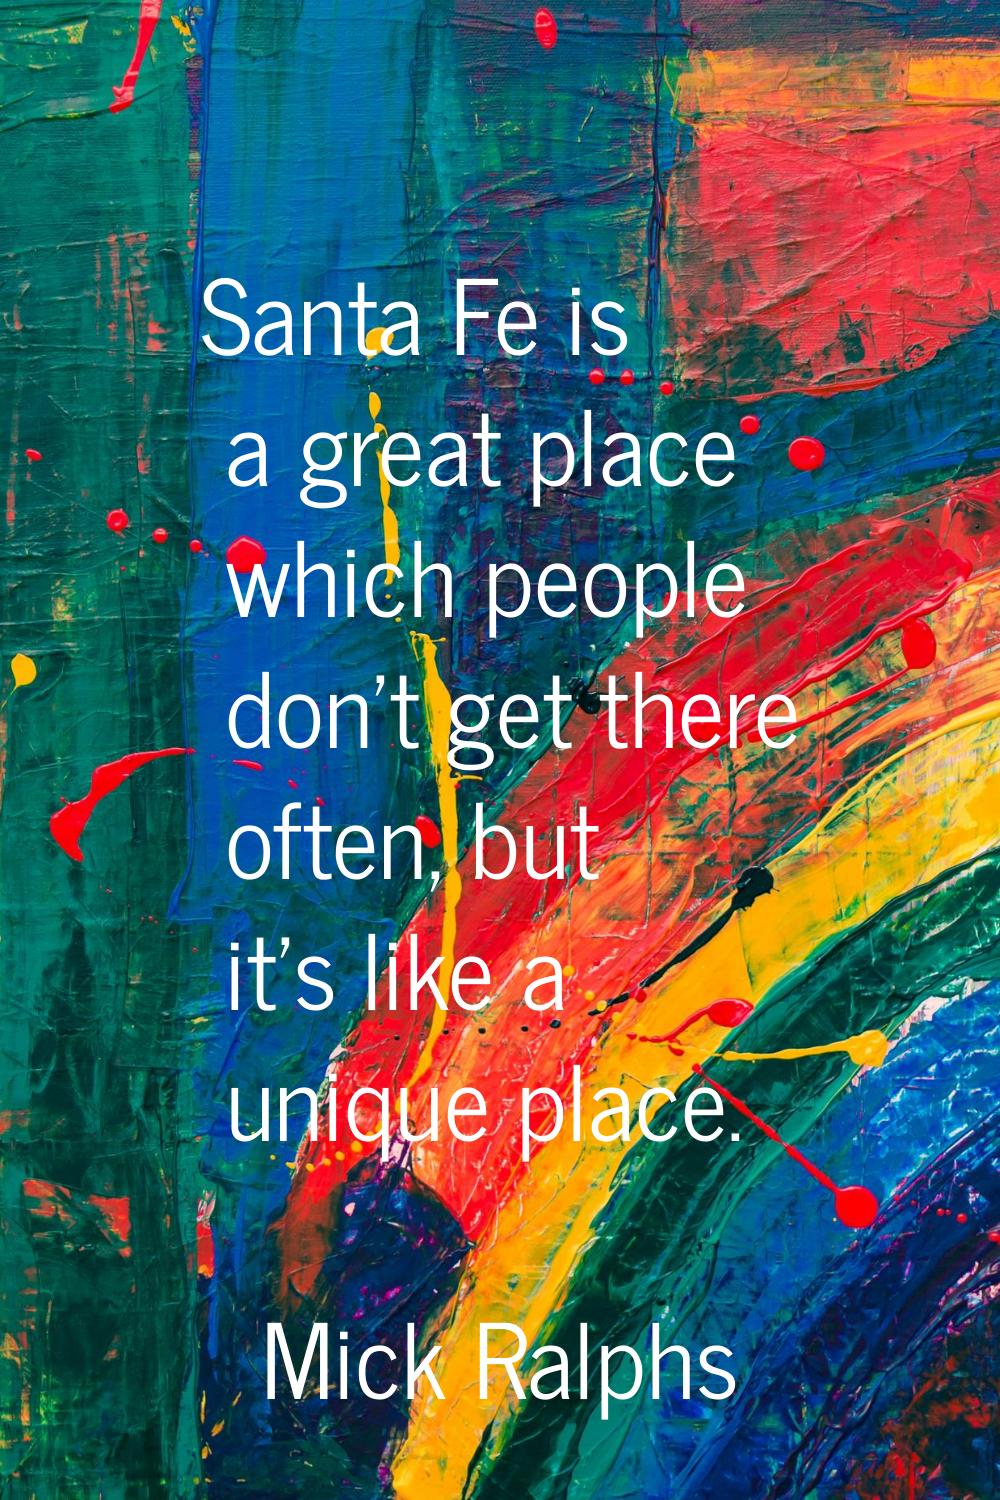 Santa Fe is a great place which people don't get there often, but it's like a unique place.